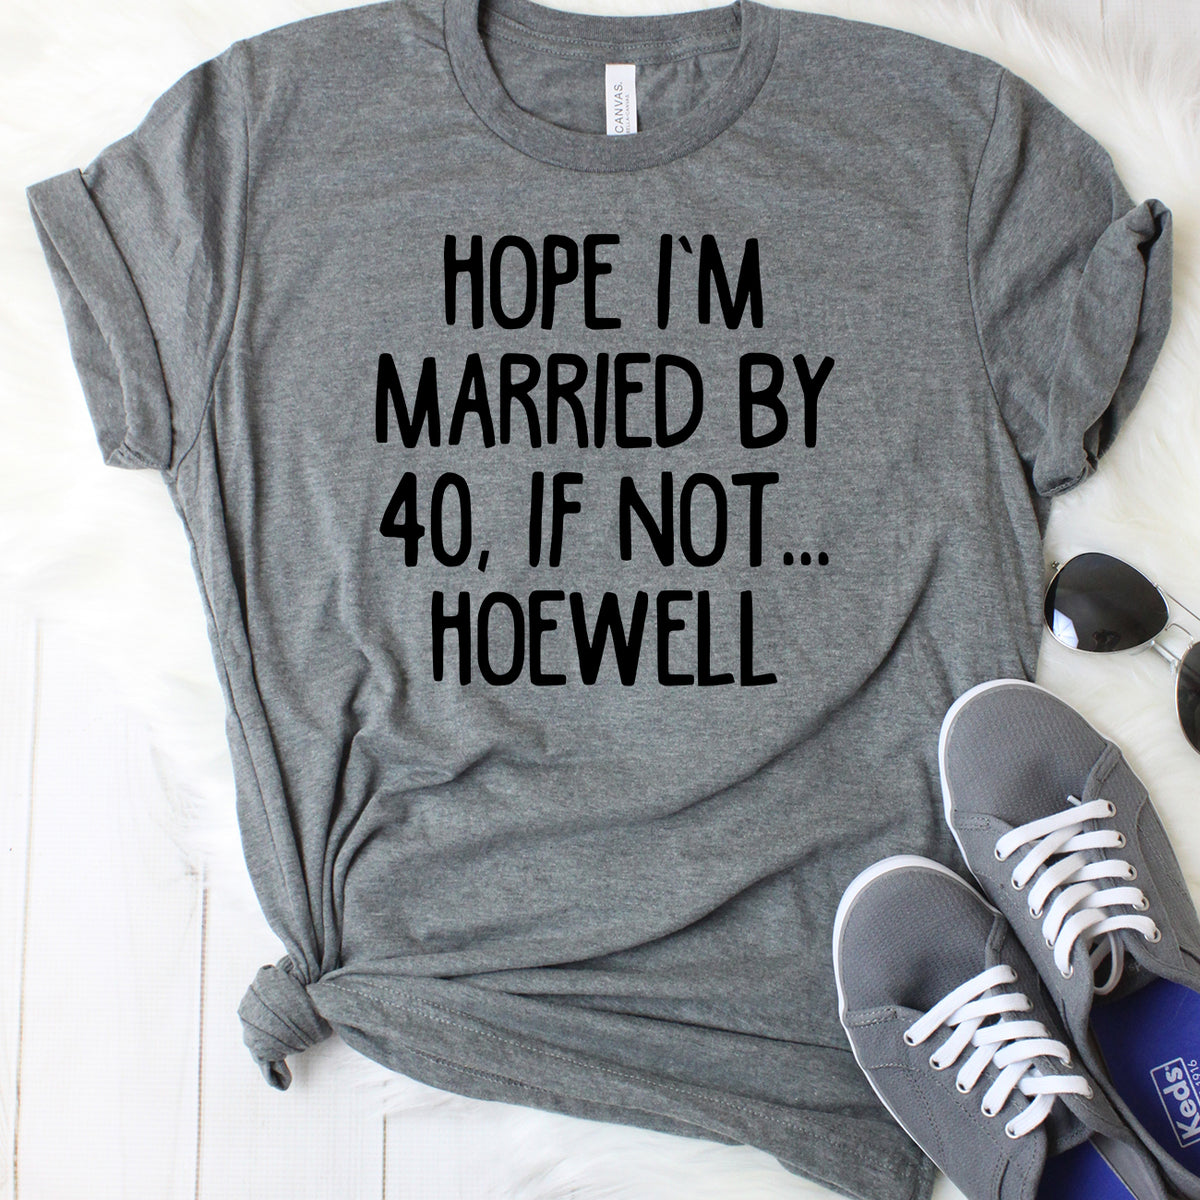 Hope I'm Married by 40, If Not Hoewell T-Shirt